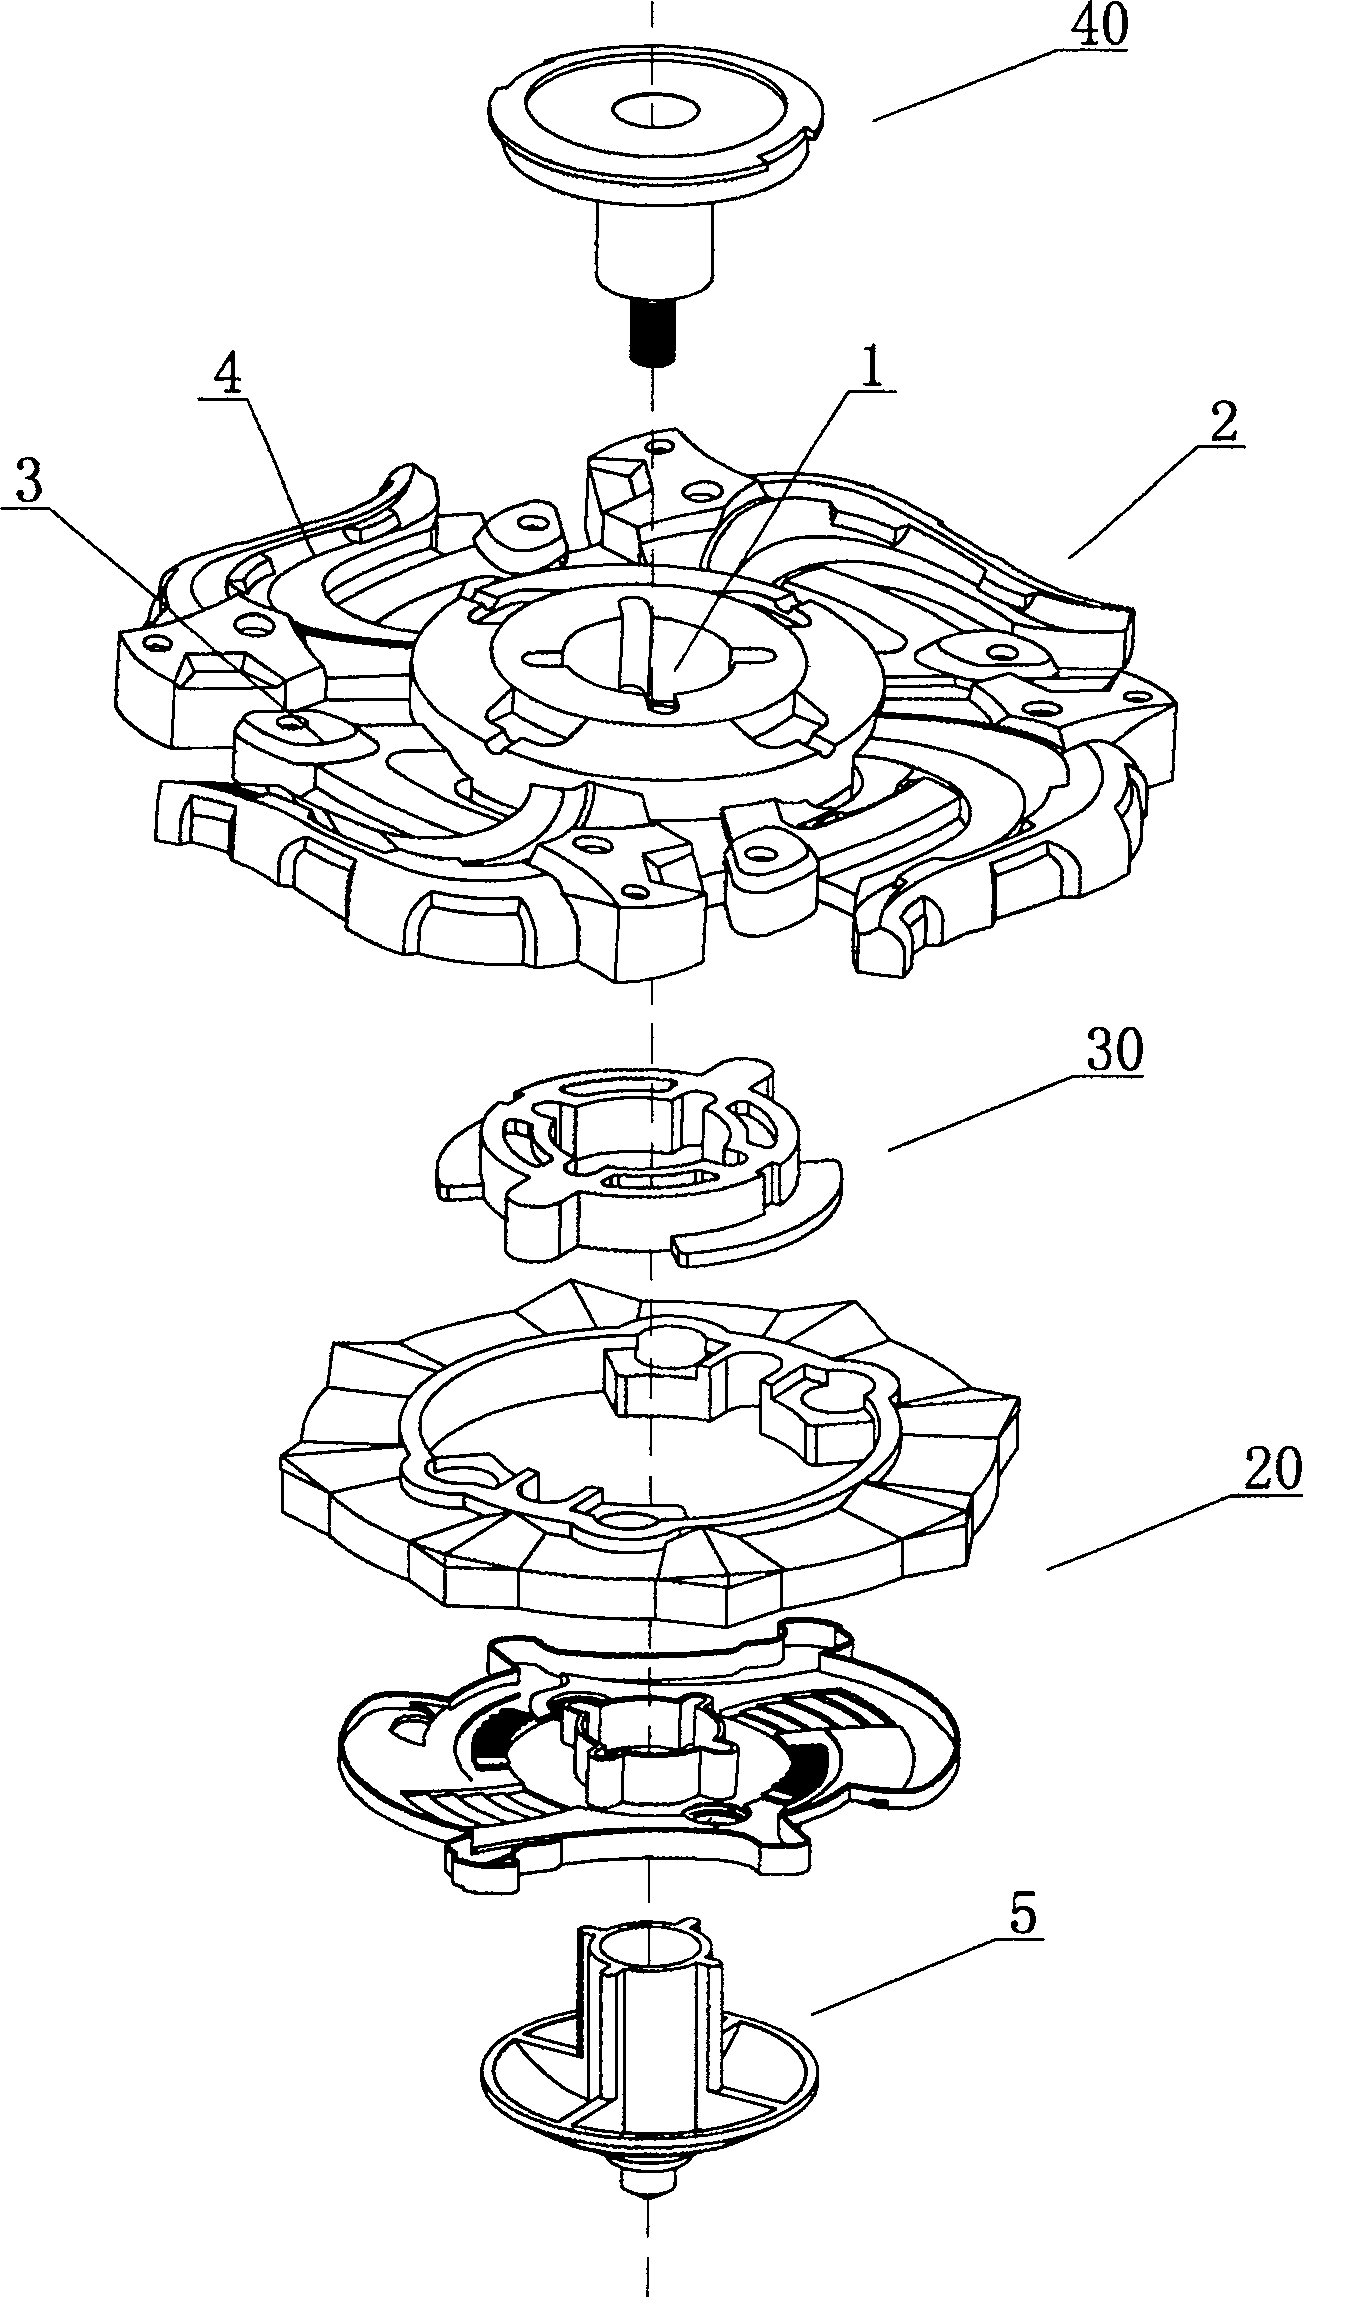 Assembled gyroscope piece structure